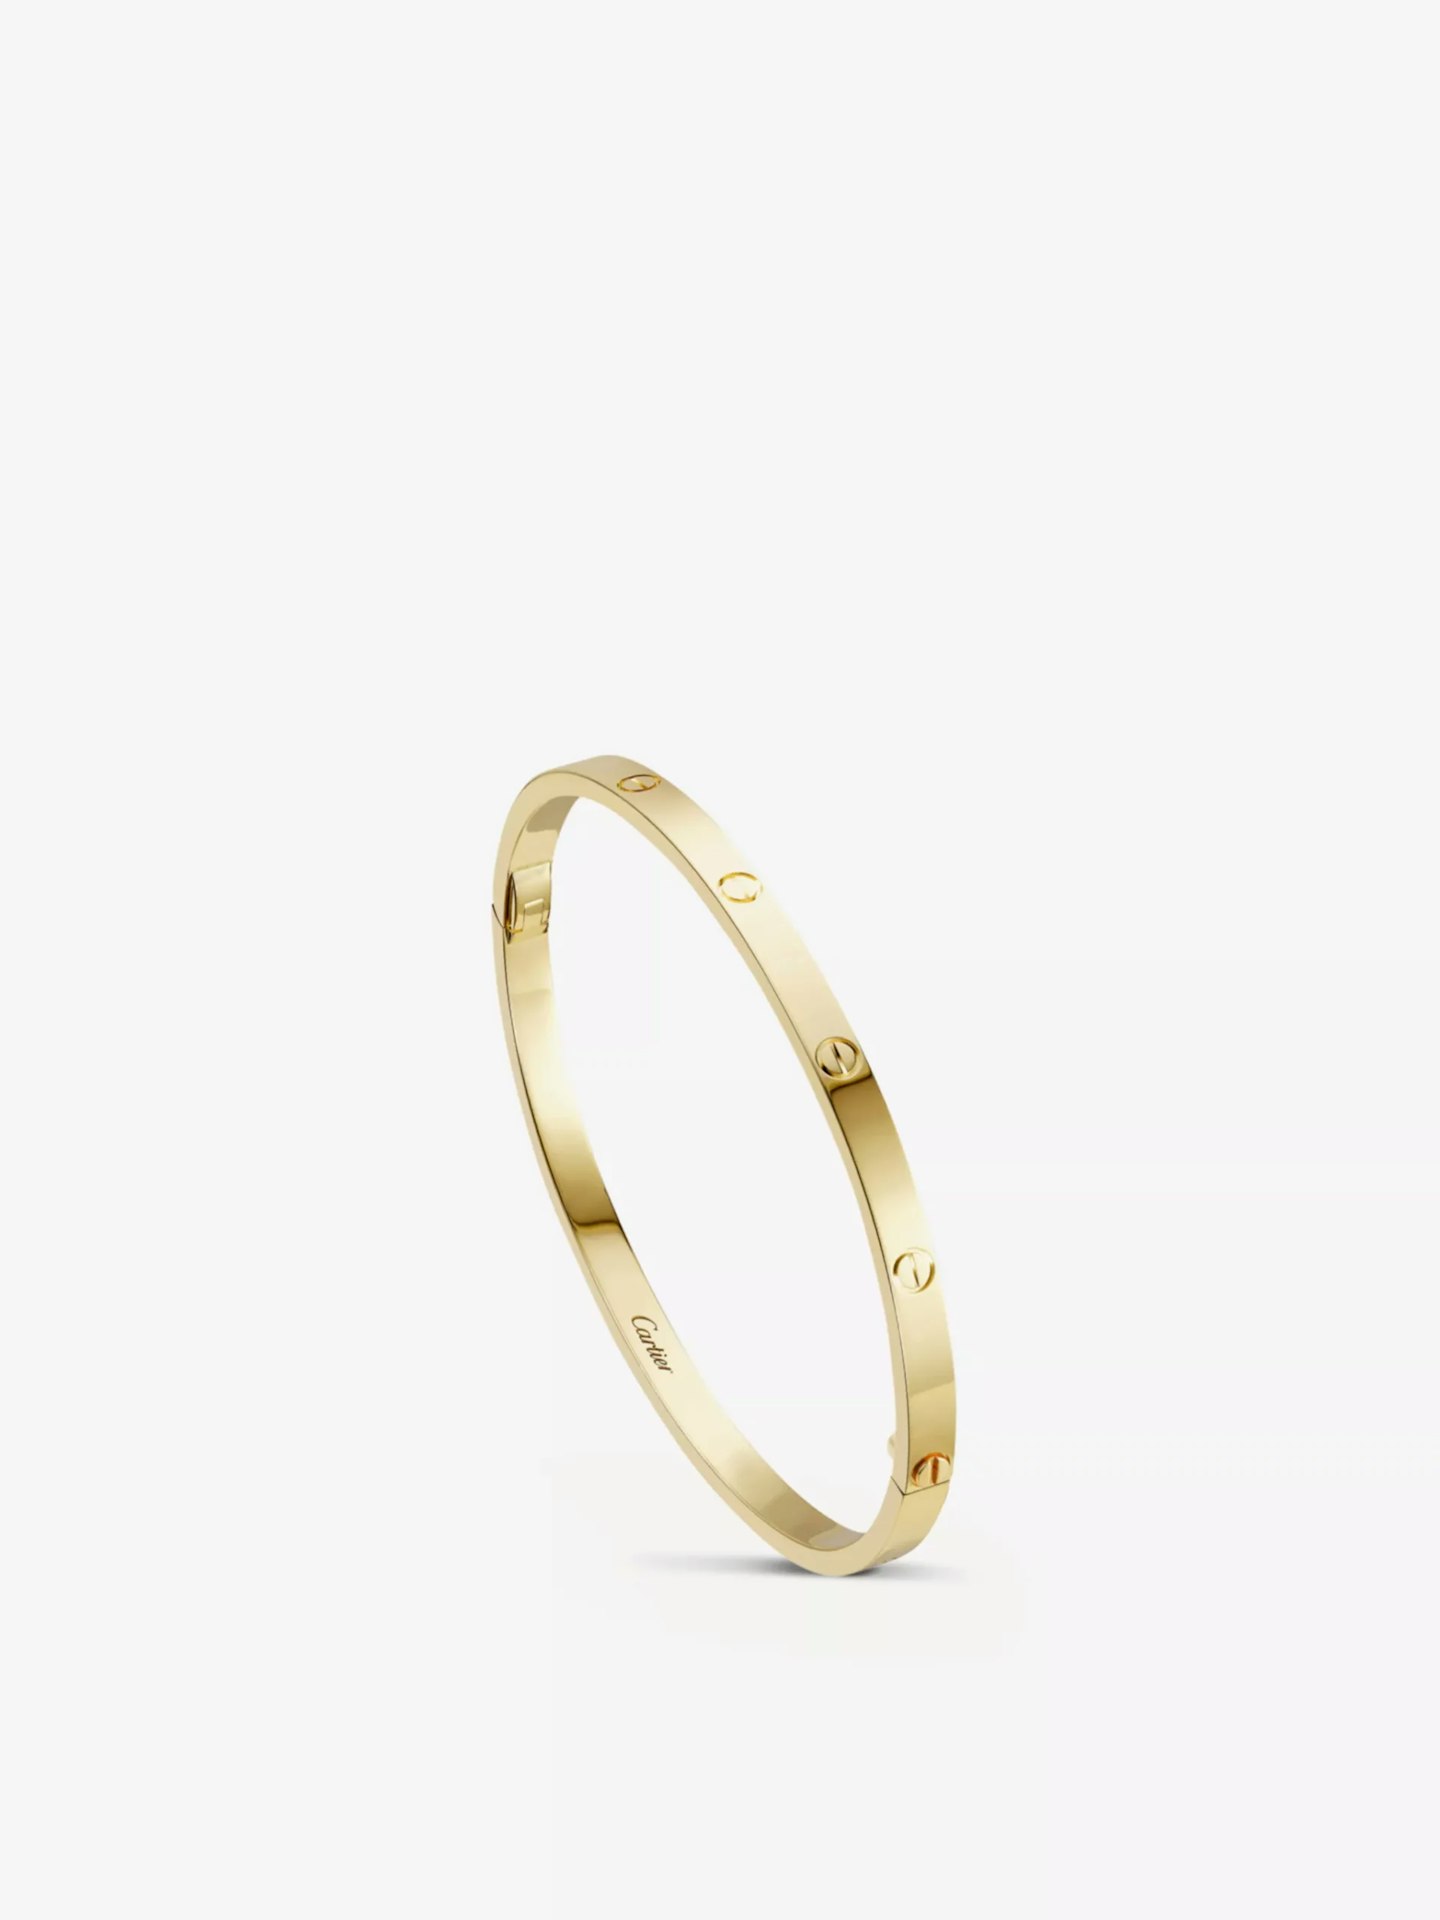 Cartier, Love Small 18ct Yellow-Gold Bracelet